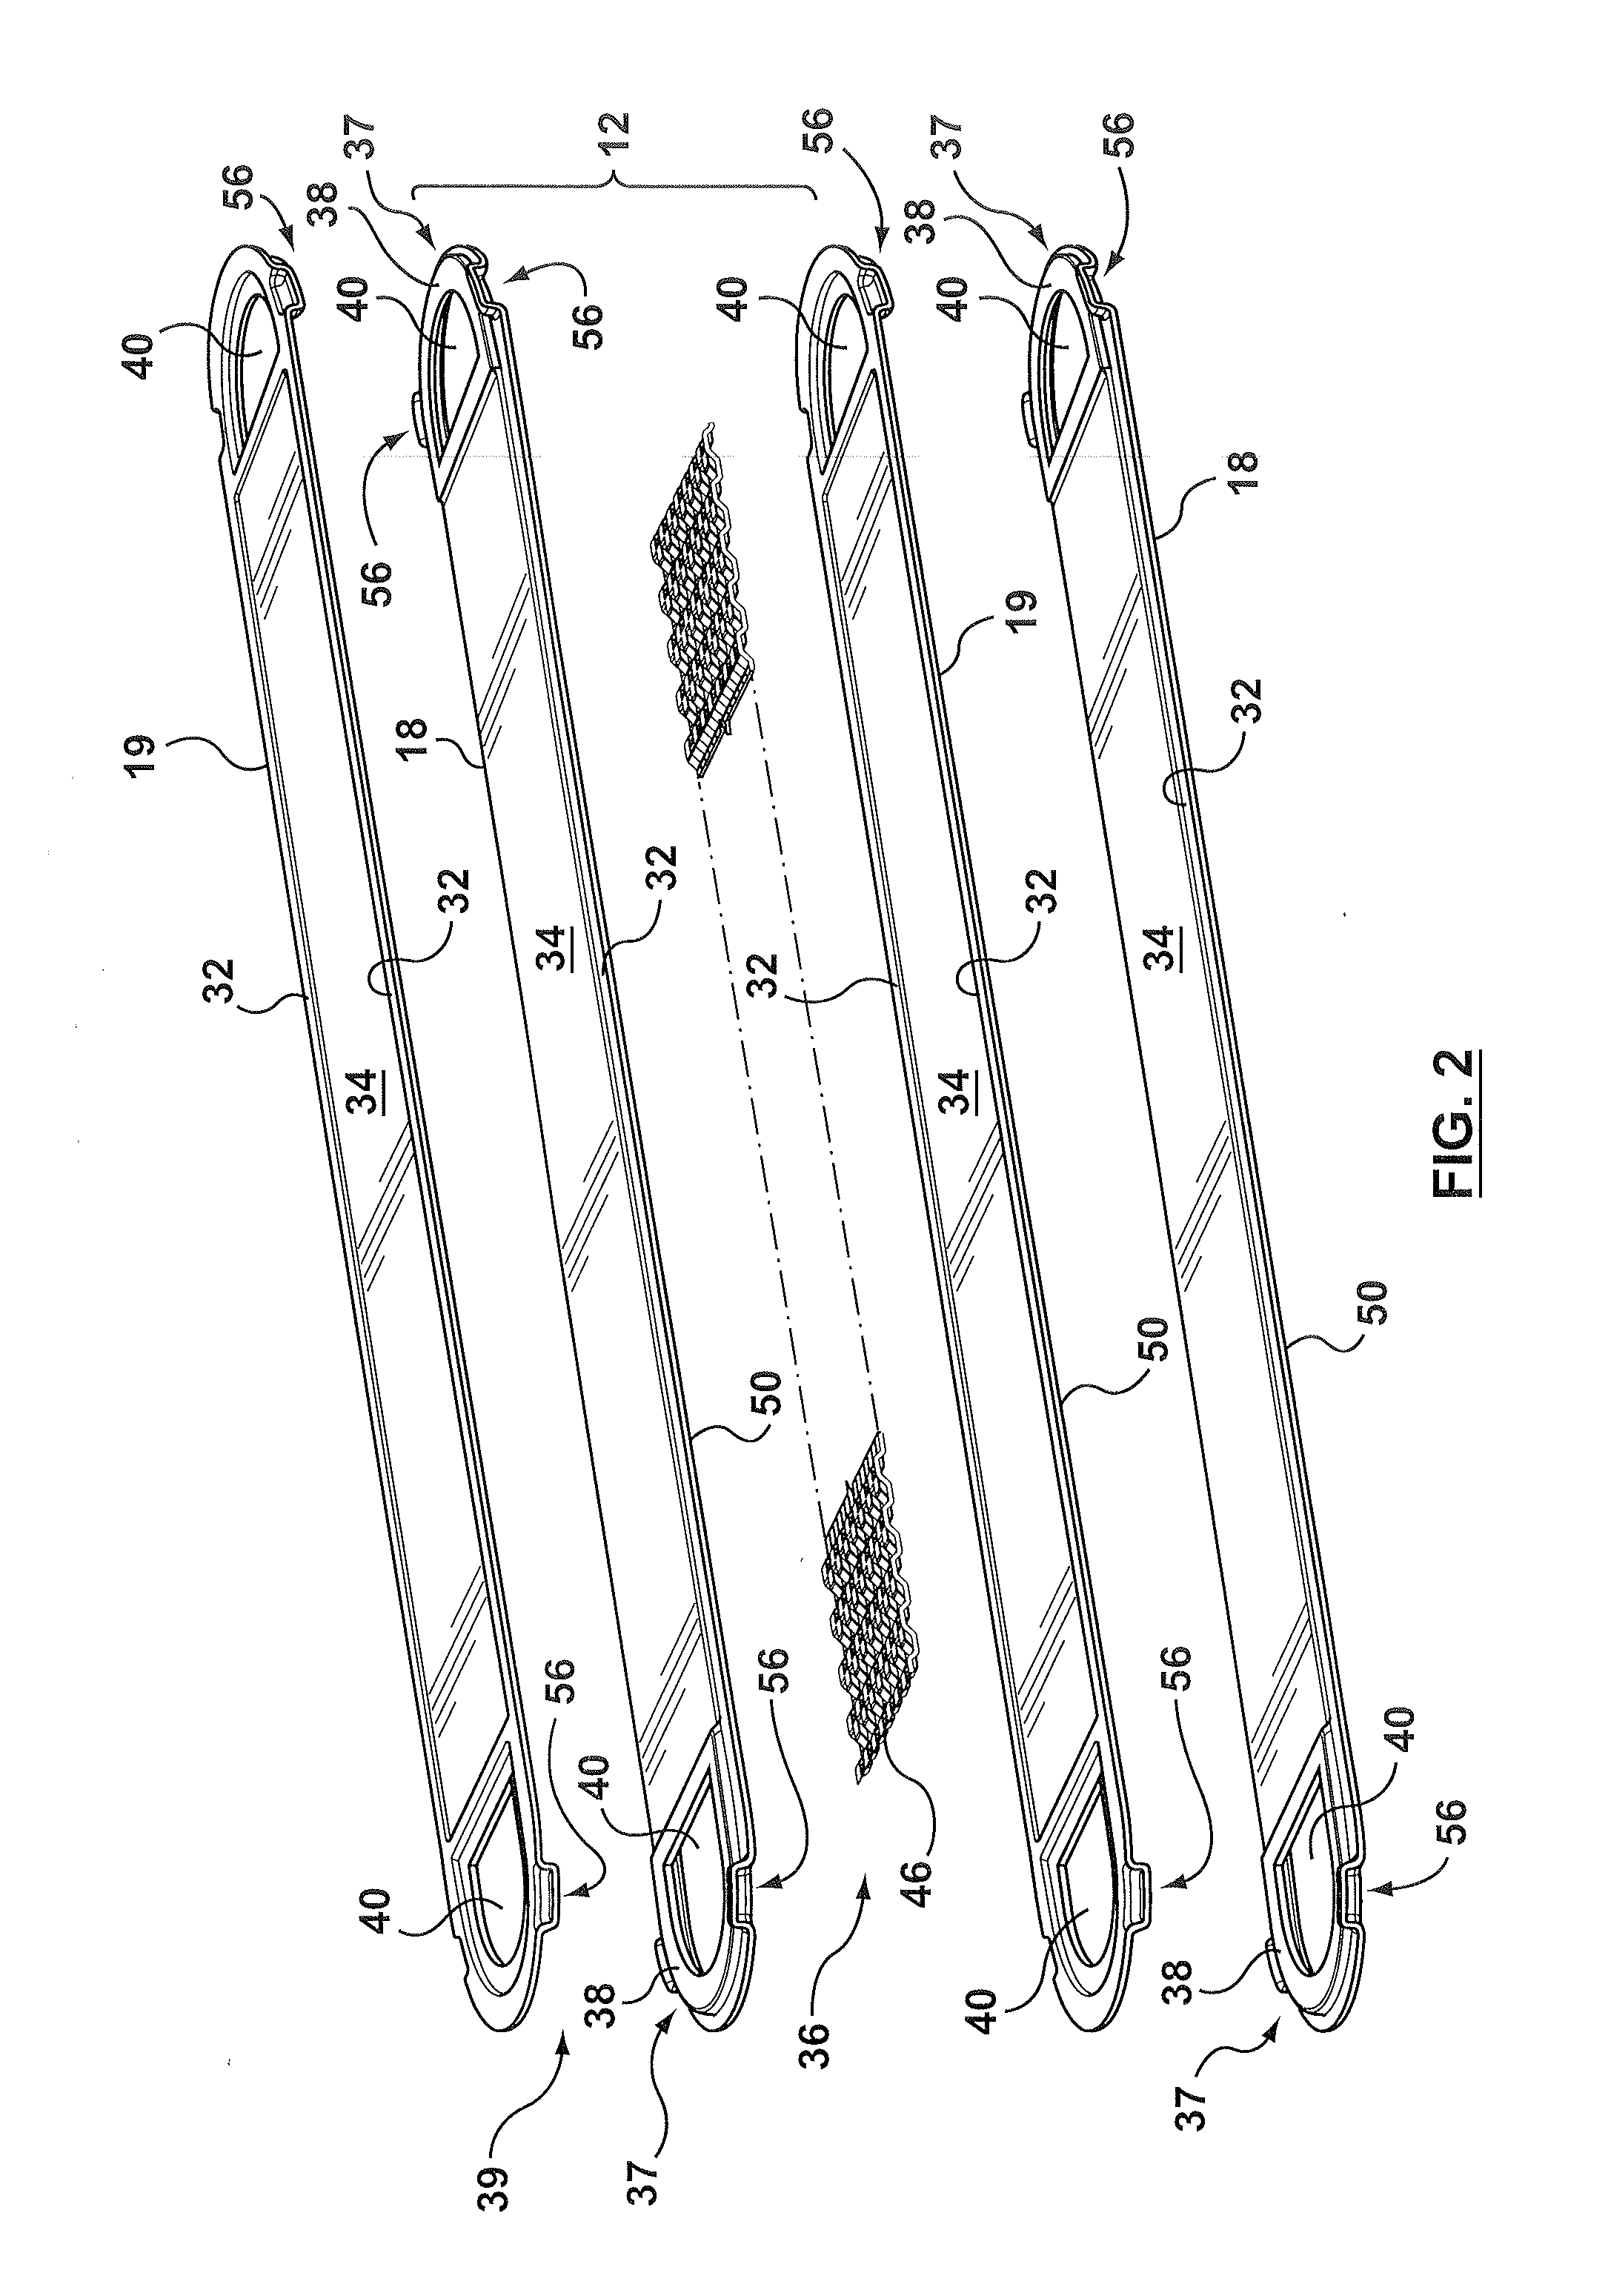 Heat exchanger with manifold strengthening protrusion